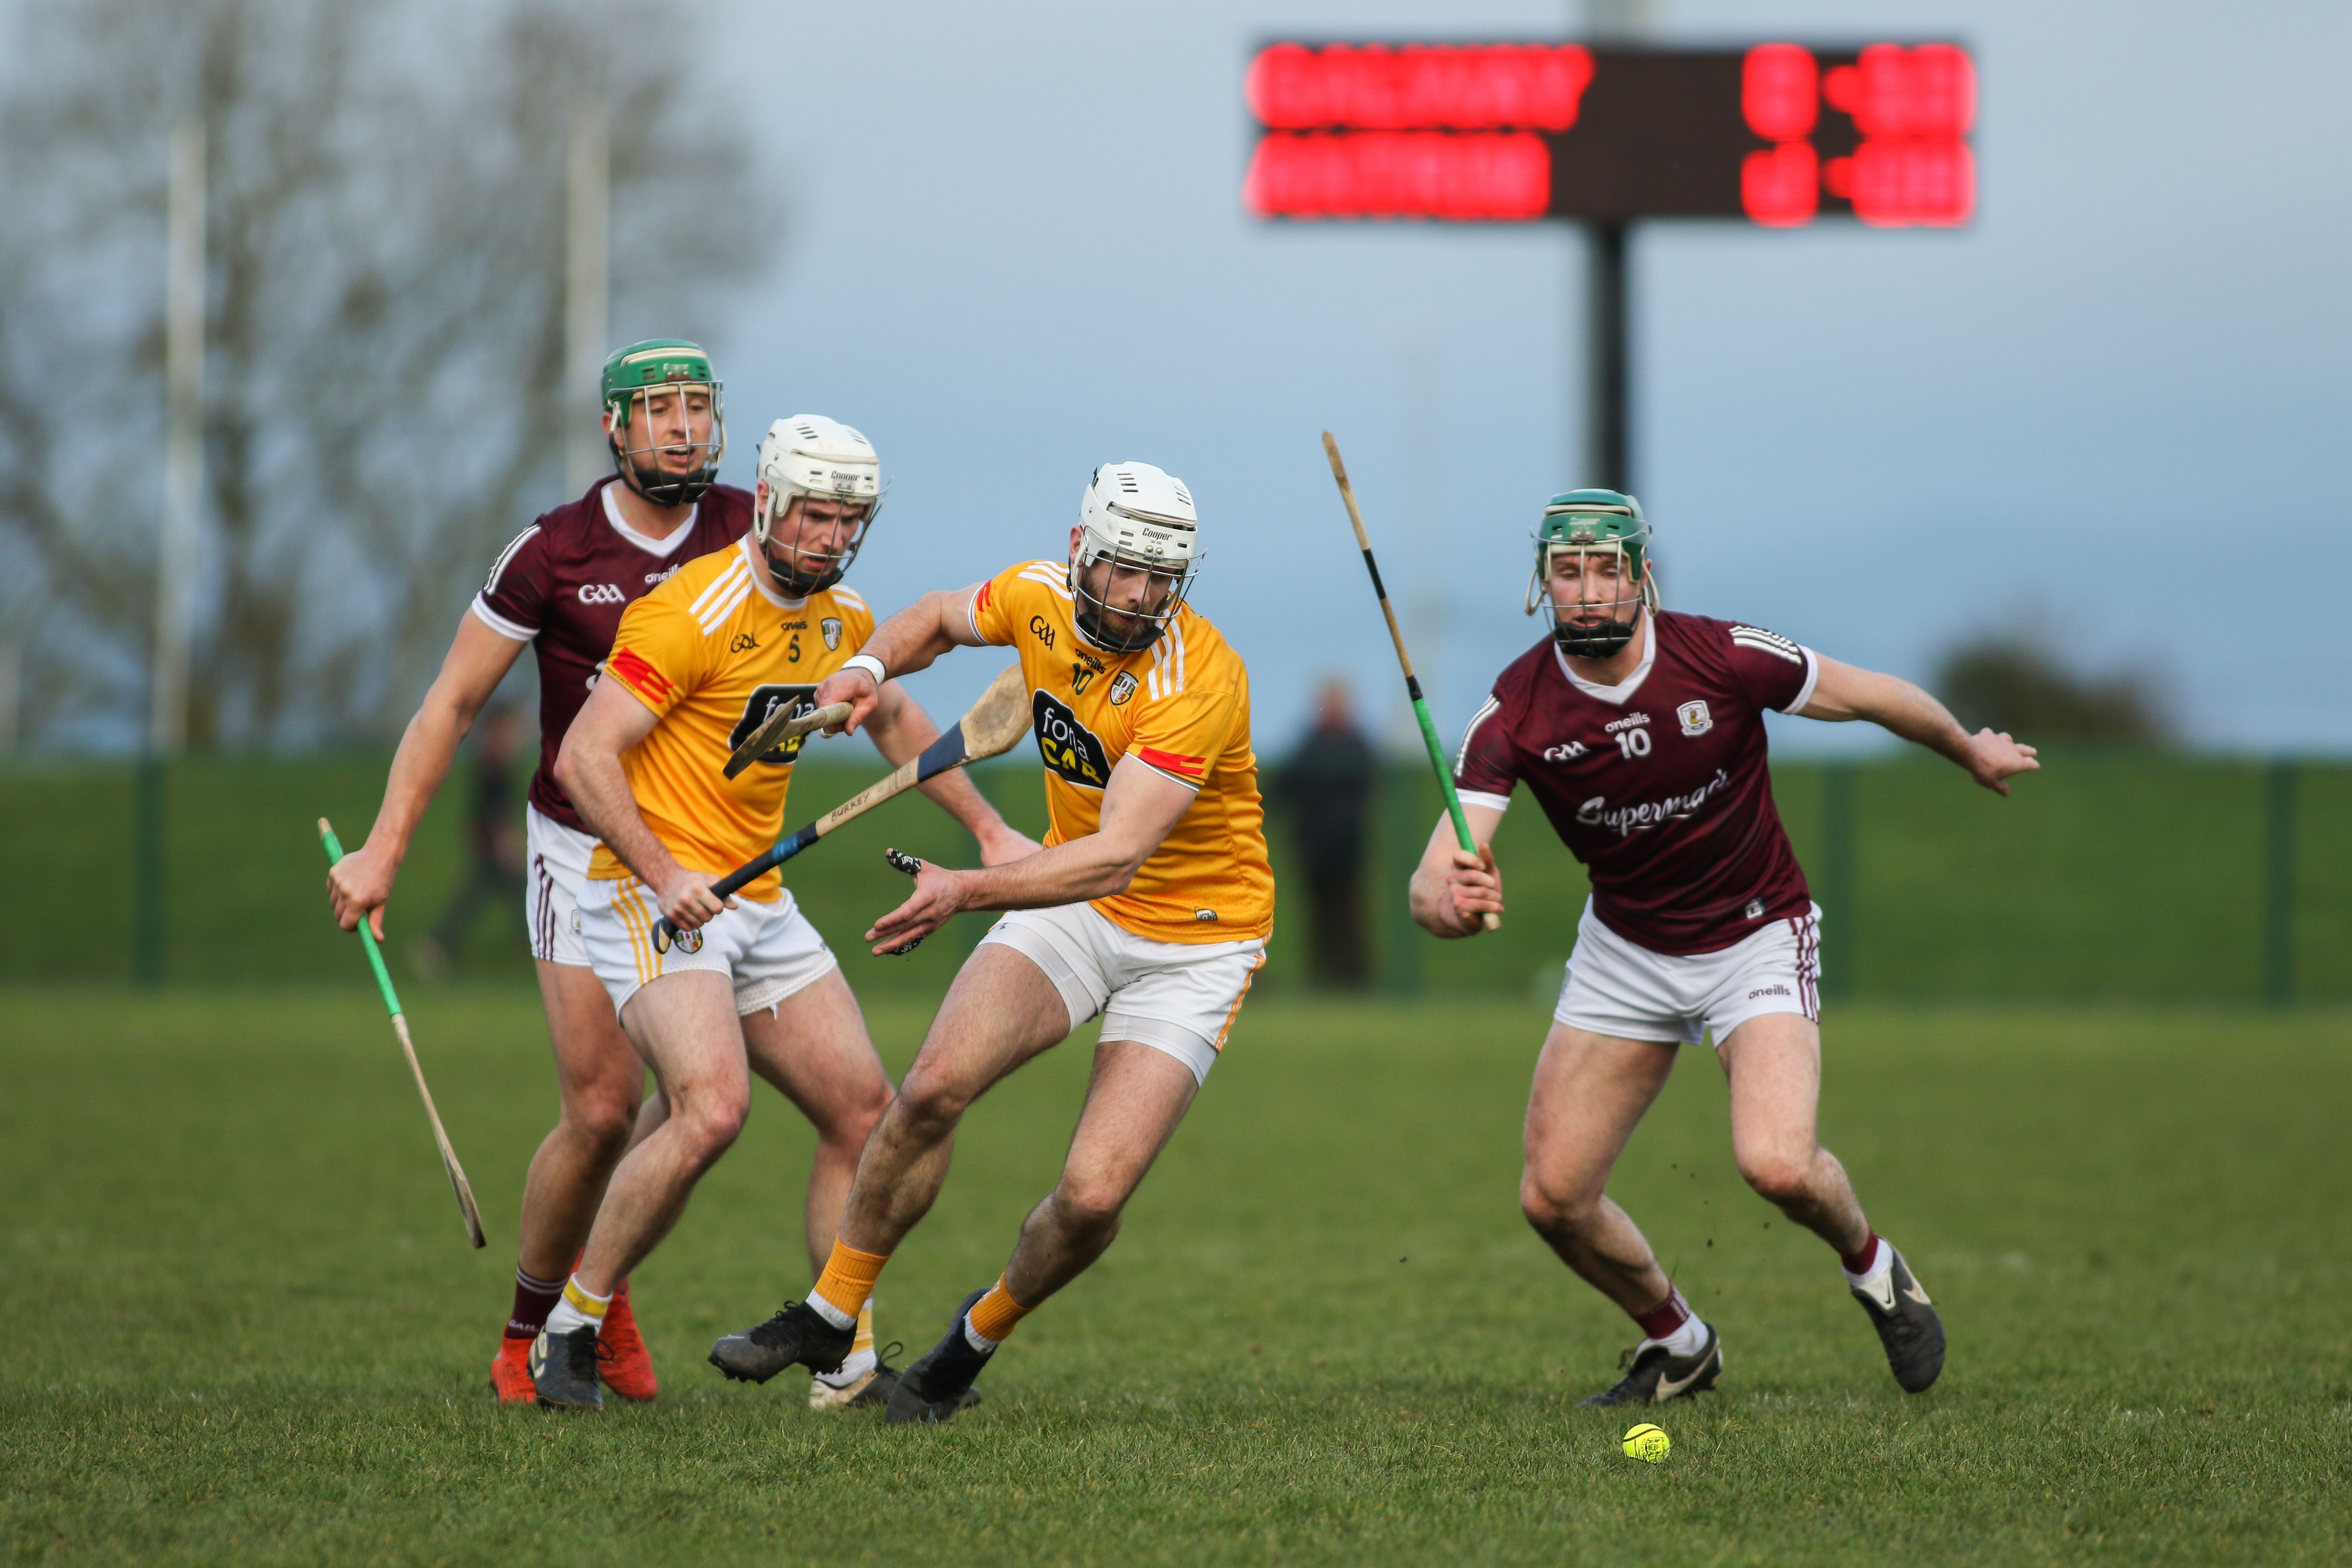 Neil McManus and Cathal Mannion battle for possession as Paddy Burke looks on